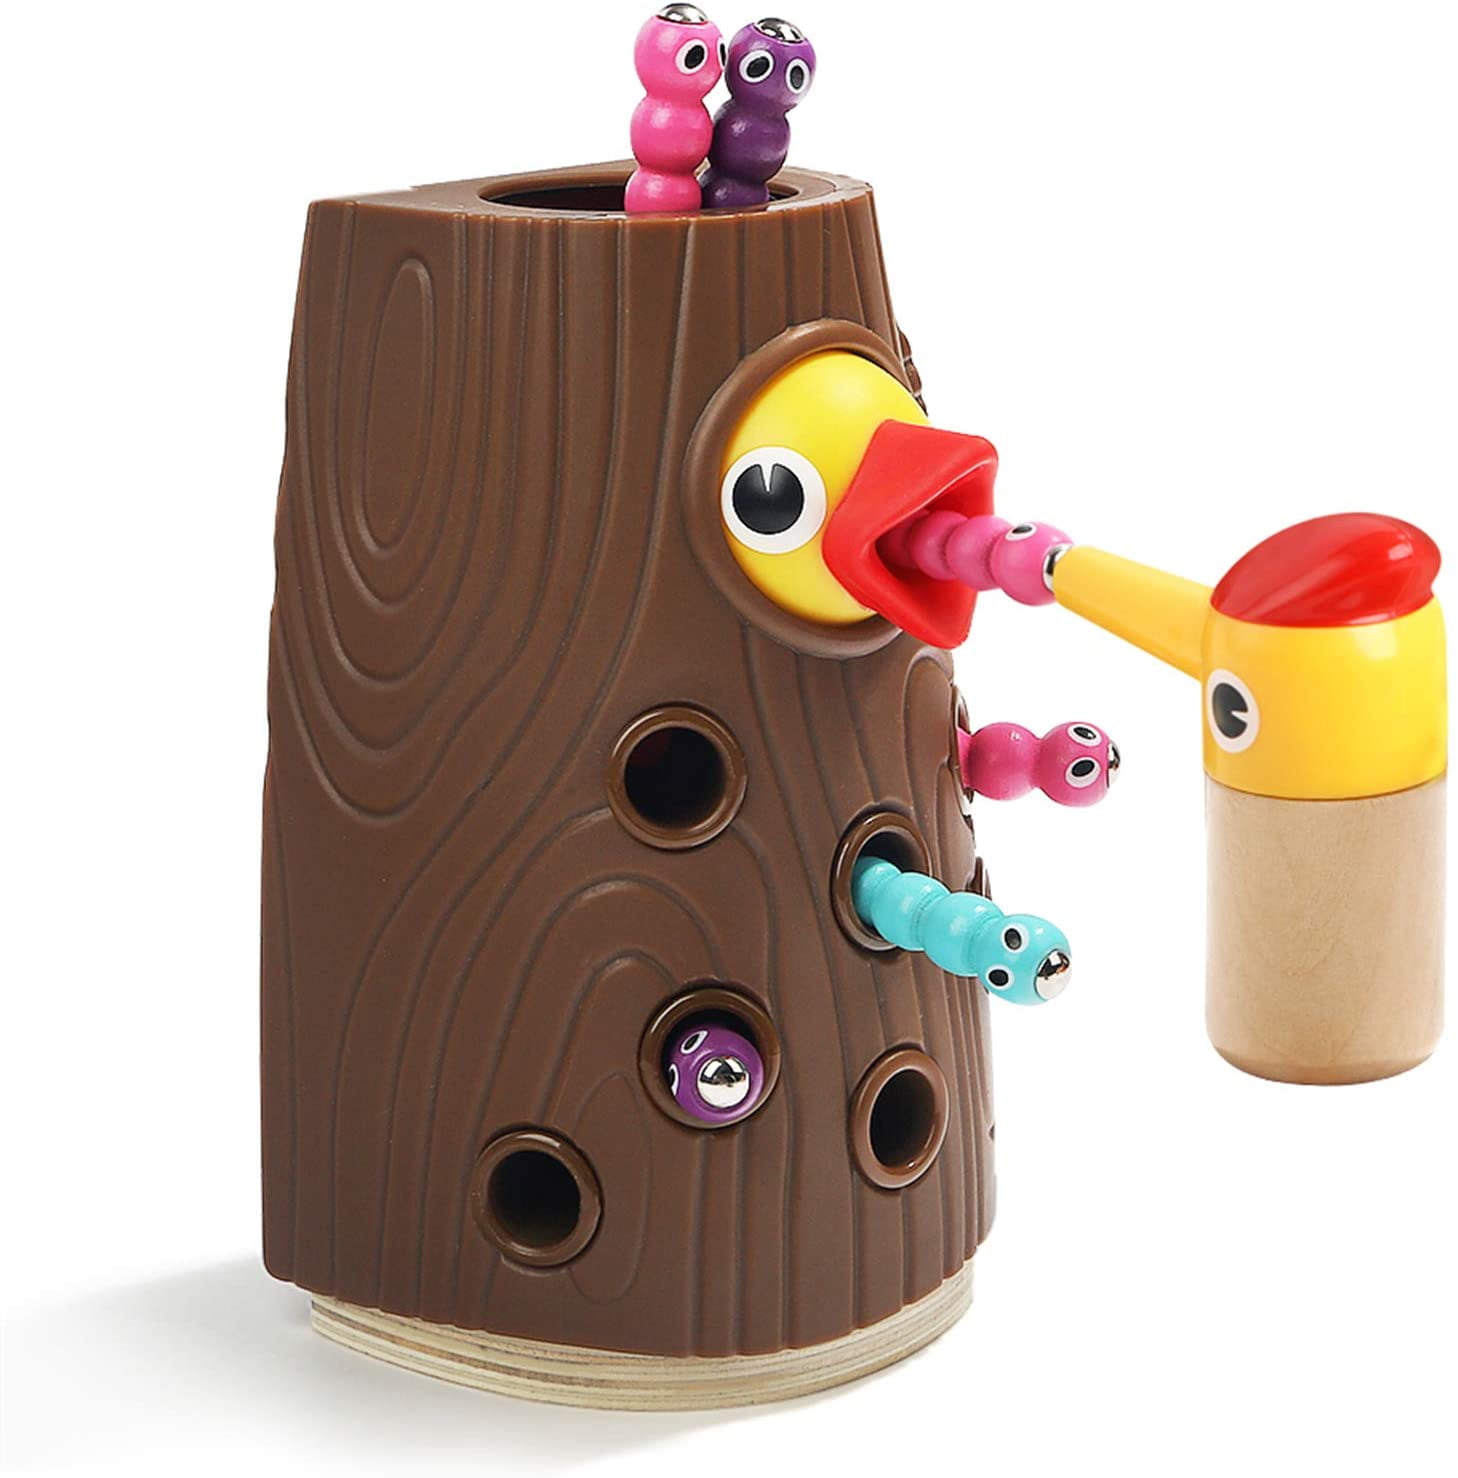 Role Play Sensory Games Gifts Children Magnetic Woodpecker Toy for Age 3 